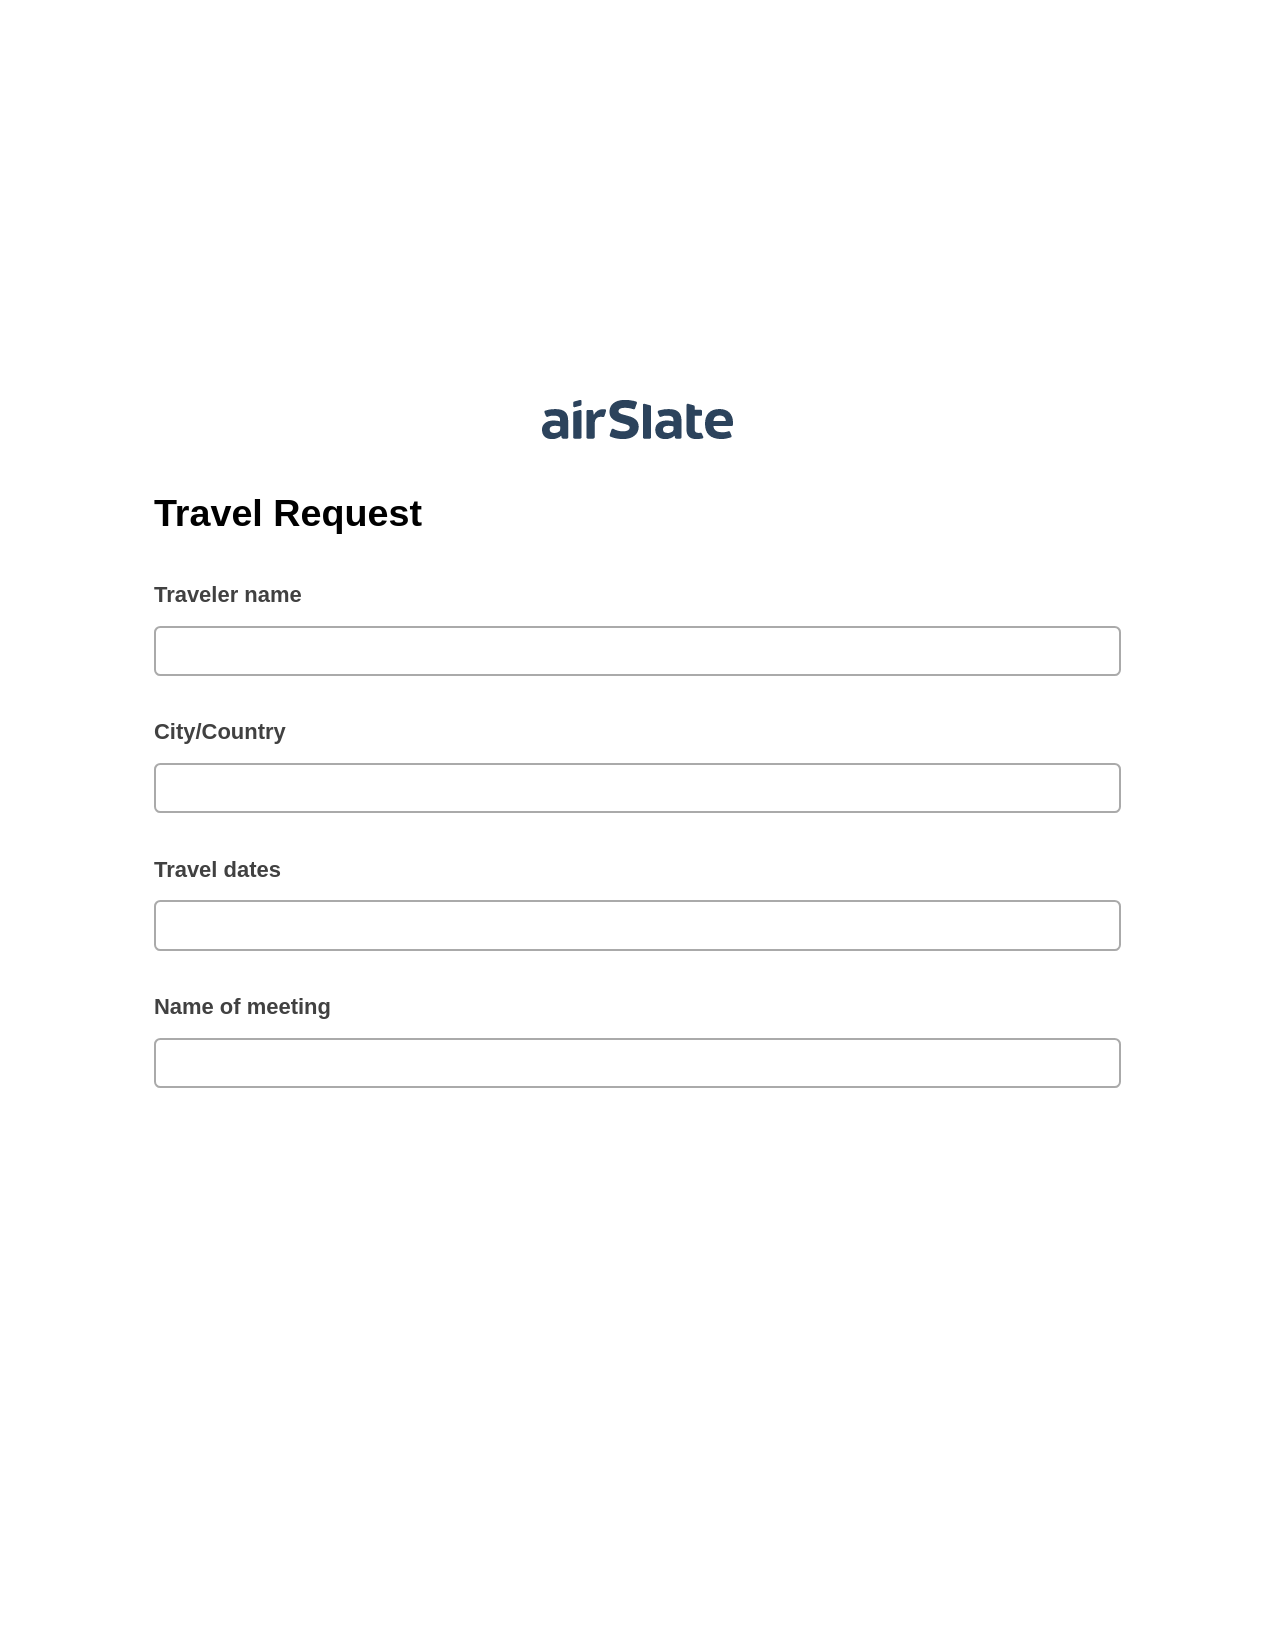 Travel Request Pre-fill from NetSuite Records Bot, System Bot - Create a Slate in another Flow, Archive to SharePoint Folder Bot